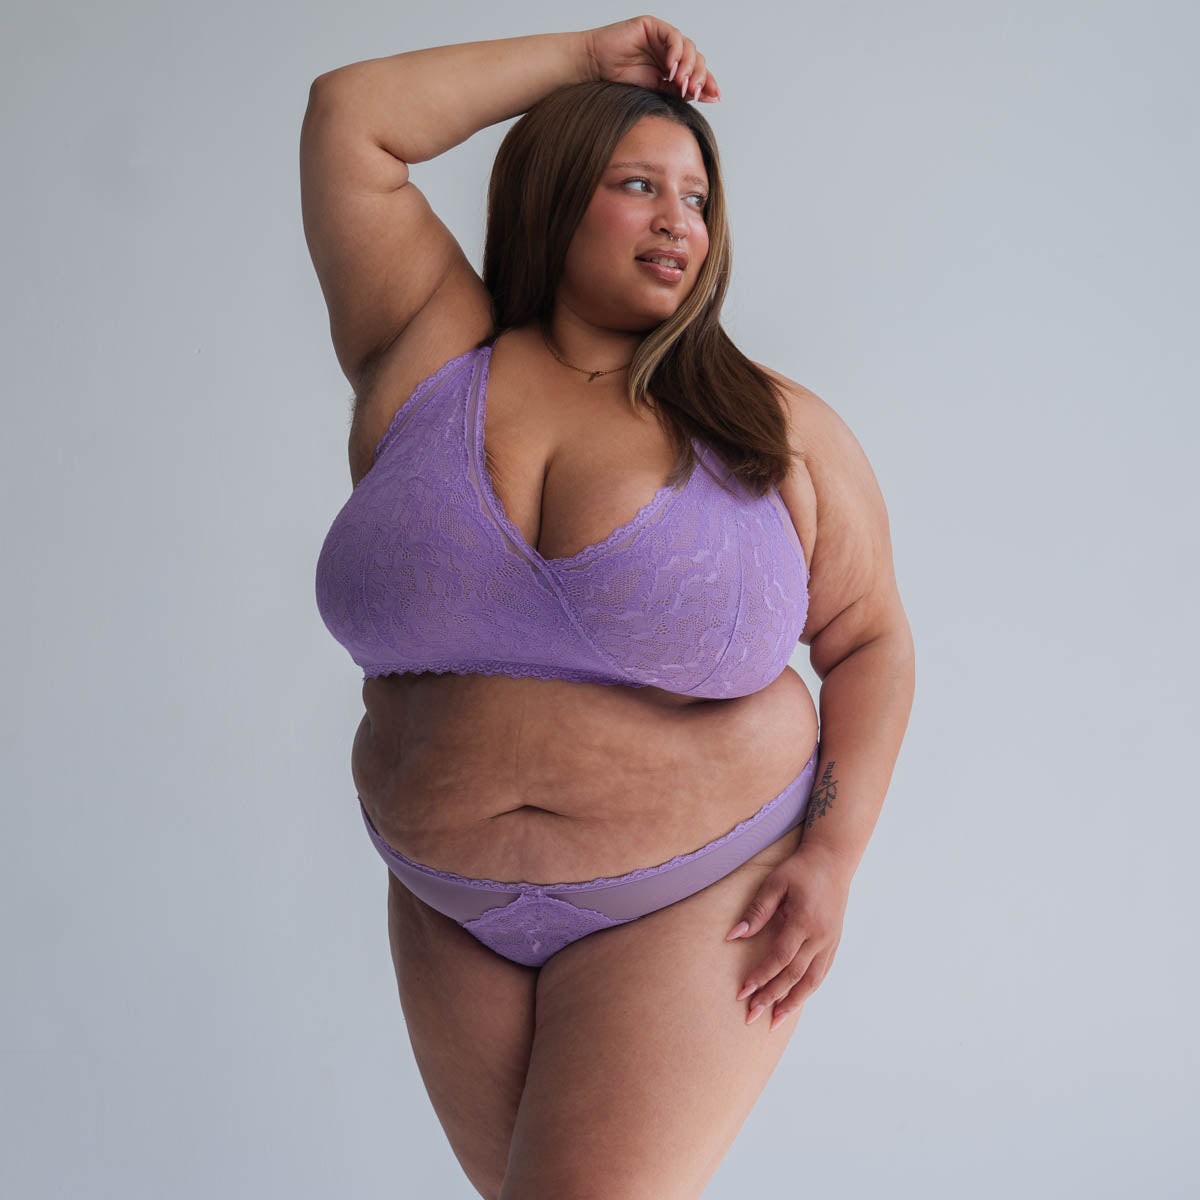 Lacey Racerback Bralette in Lilac By Uye Surana - Easy fit sizes XS-3X